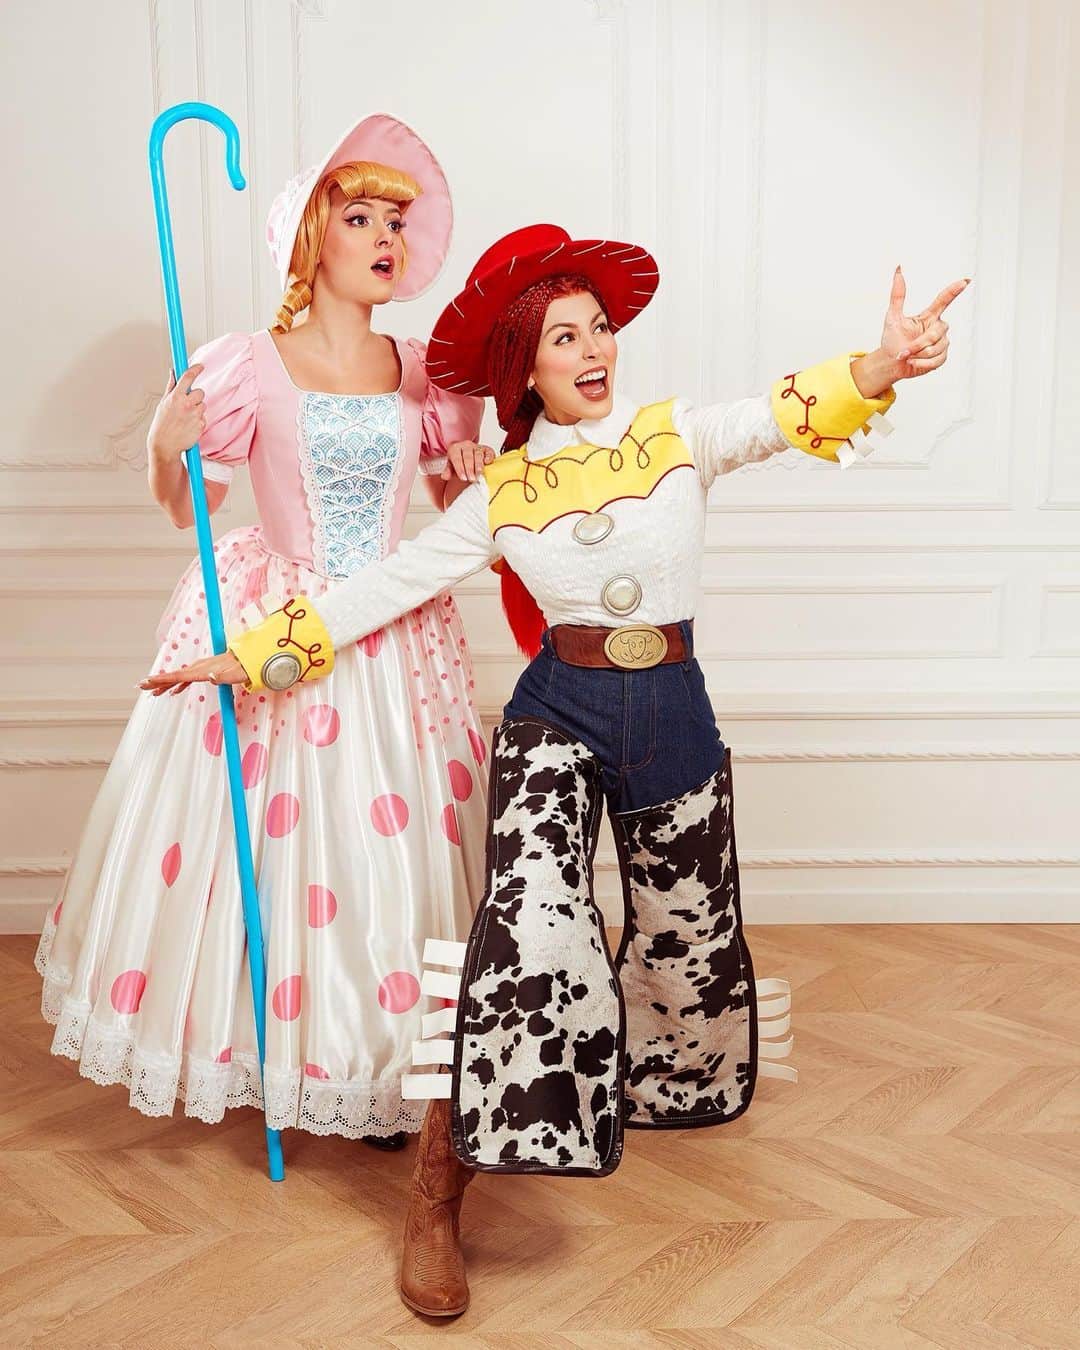 Nadya Antonのインスタグラム：「« Lily here ! Making Bo Peep cosplay after 13 years was a goal, but making it as a duo with @nadyasonika as Jessie was a DREAM ! 😍 I couldn’t be happier with this photoshoot by @anto_and_the_cosplayers 🥰 »  « Nadya here! Disney cosplay collaboration with a princess itself @lily_on_the_moon was truly a dream come true, can’t wait for our future plans together! You can suggest on the comments for our next cosplay 🙏🏻  🤠 Jessie made and worn by: @nadyasonika  🎀 Bo Peep made and worn by: yours truely  📸 Photo by: @anto_and_the_cosplayers  📍Location: @studioabelanet  📖 Patterns from @nikitacosplay ´s Self-Made Princess tutorial book」